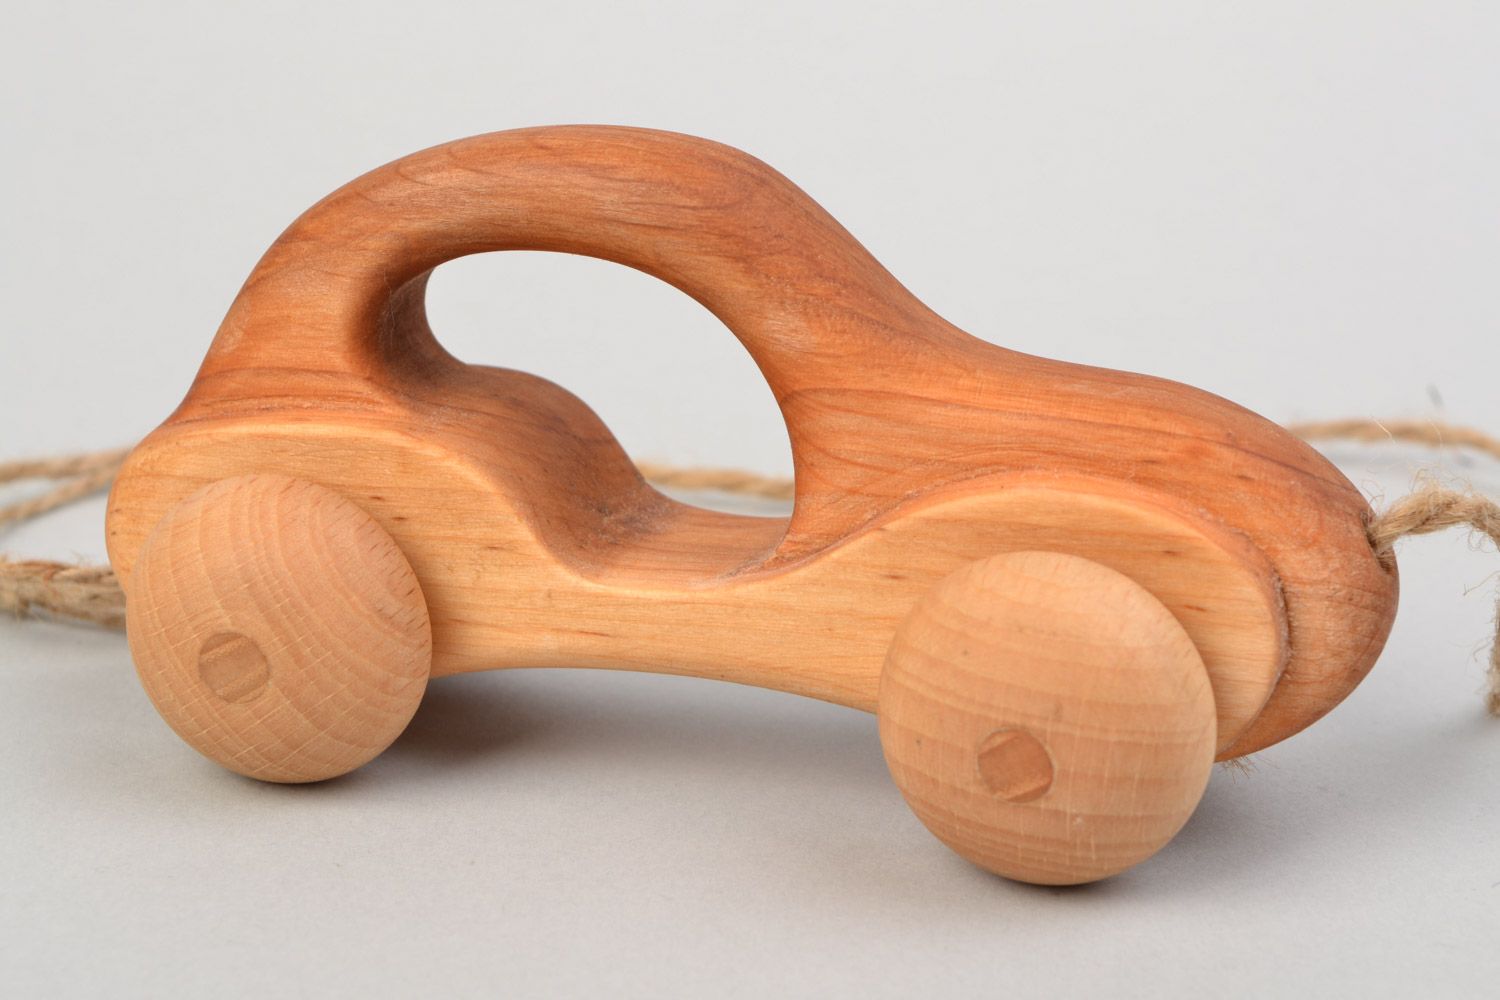 Handmade children's wooden wheeled toy car imbued with linseed oil photo 3